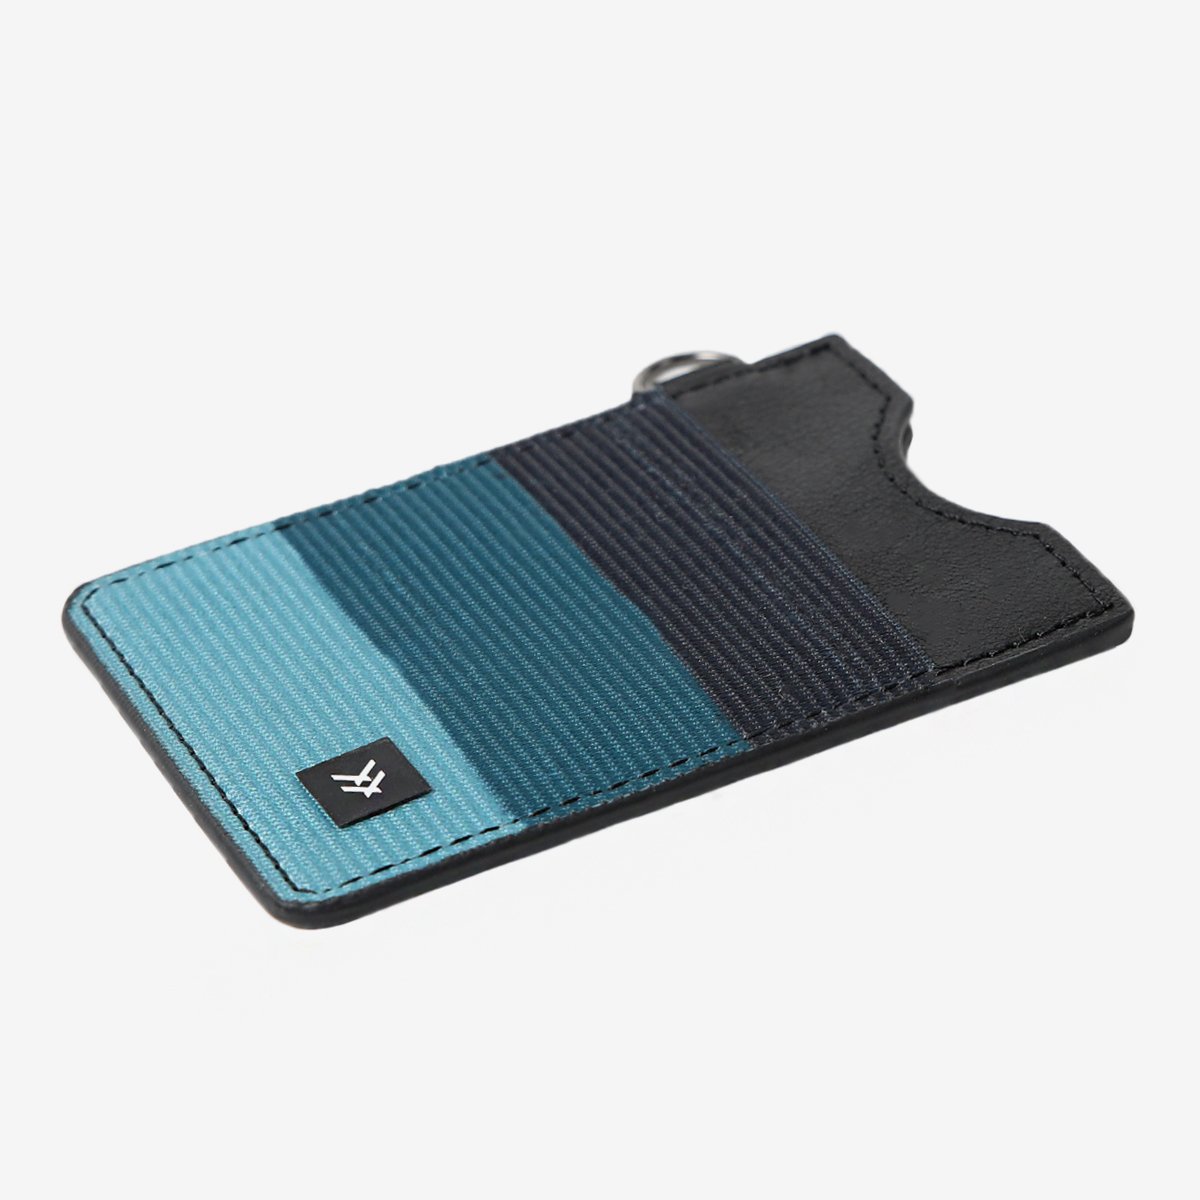 Blue and black striped vertical wallet